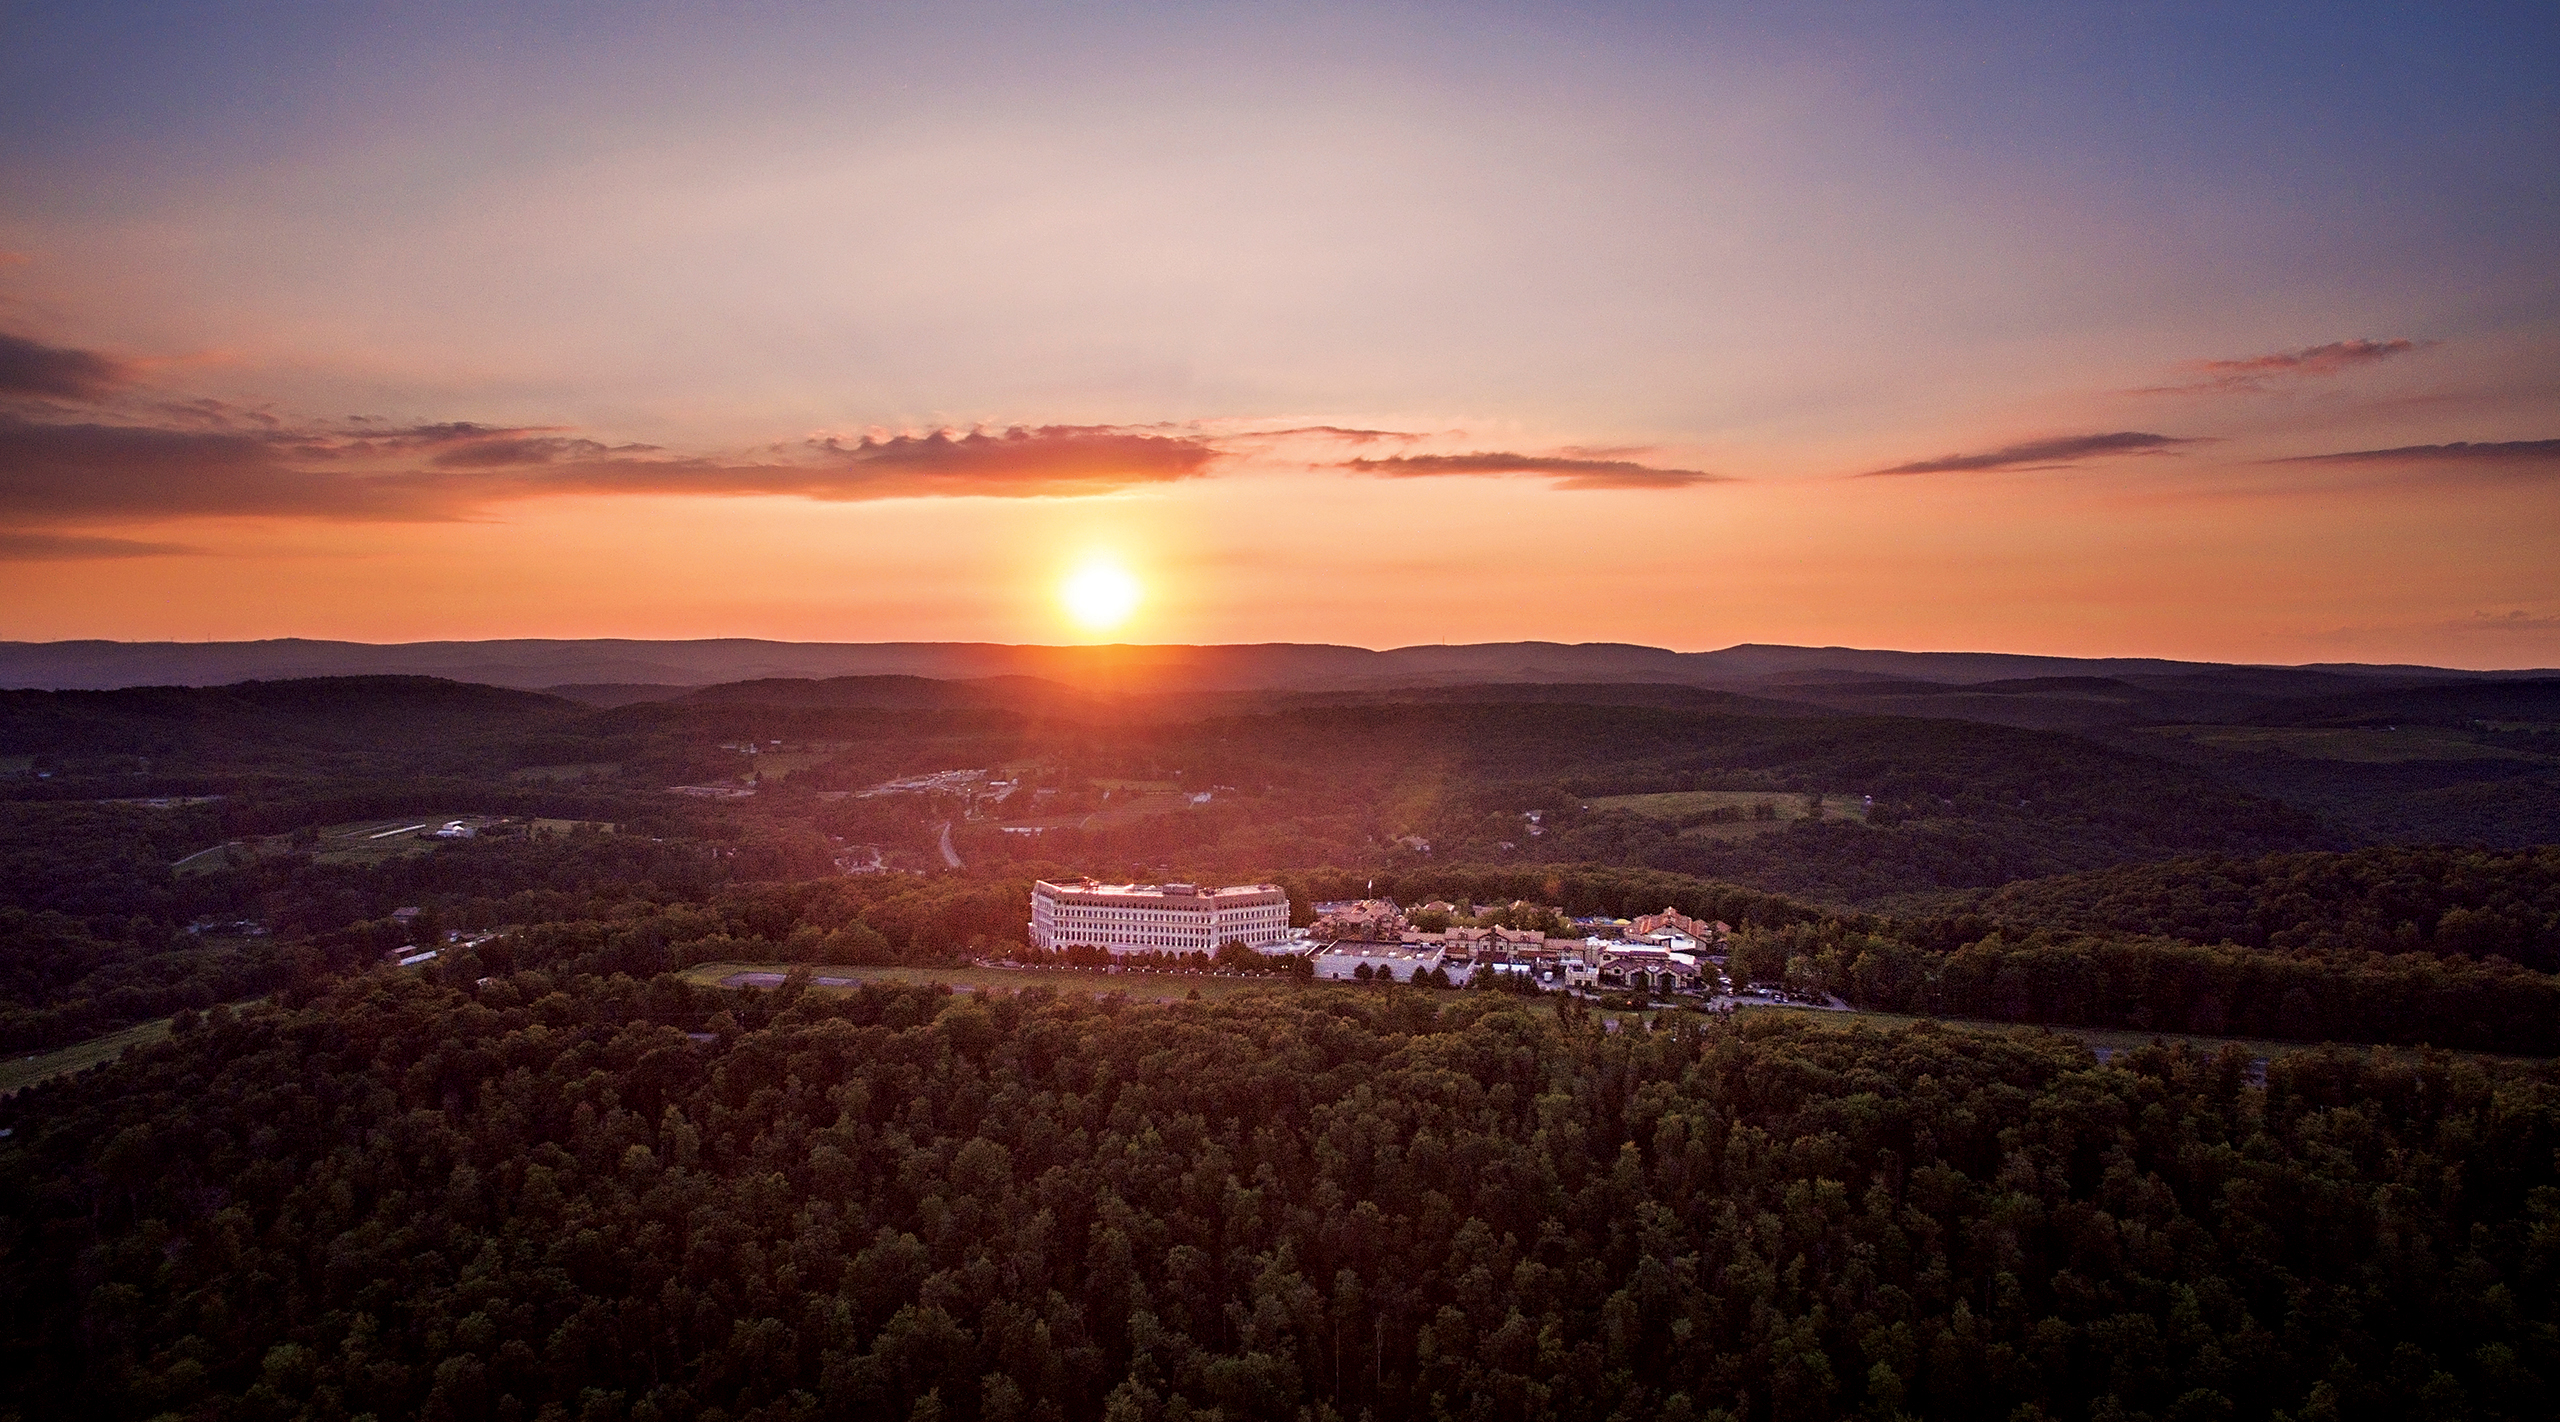 Aerial view of The Chateau and The Grand Lodge at Nemacolin at sunset